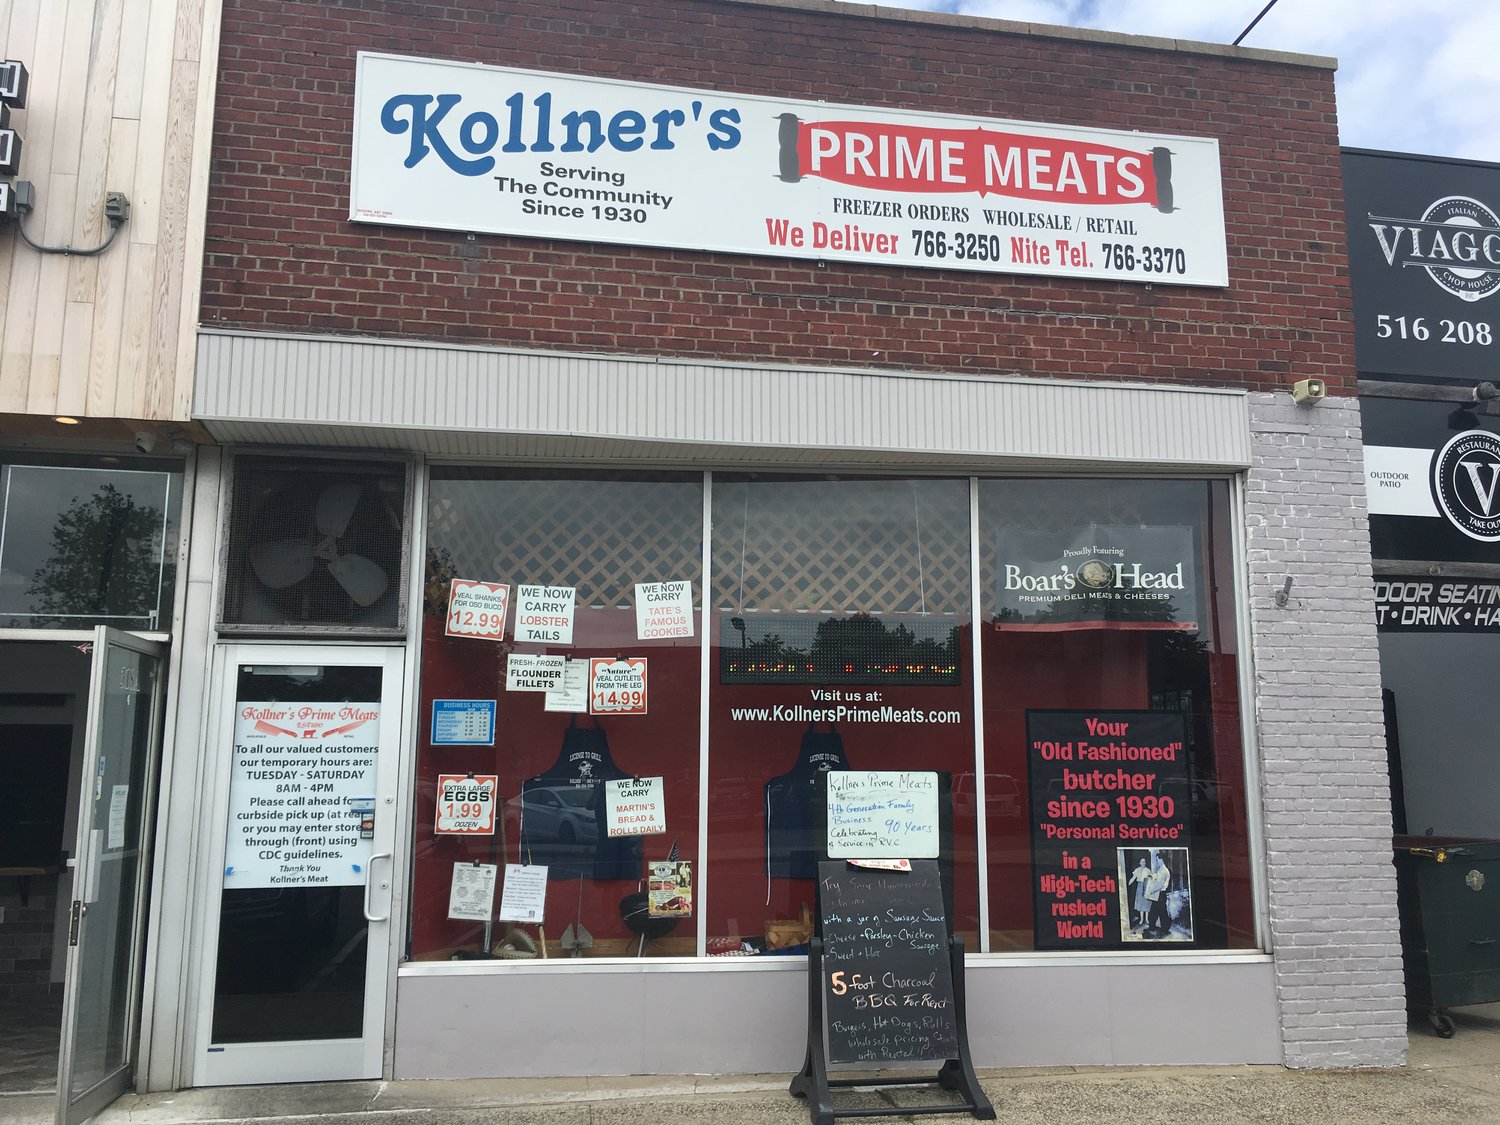 Kollner’s Prime Meats at 320 Sunrise Highway is celebrating its 90th year in business. The butcher shop, established in 1930, is a fourth-generation family business that prides itself on offering quality products.